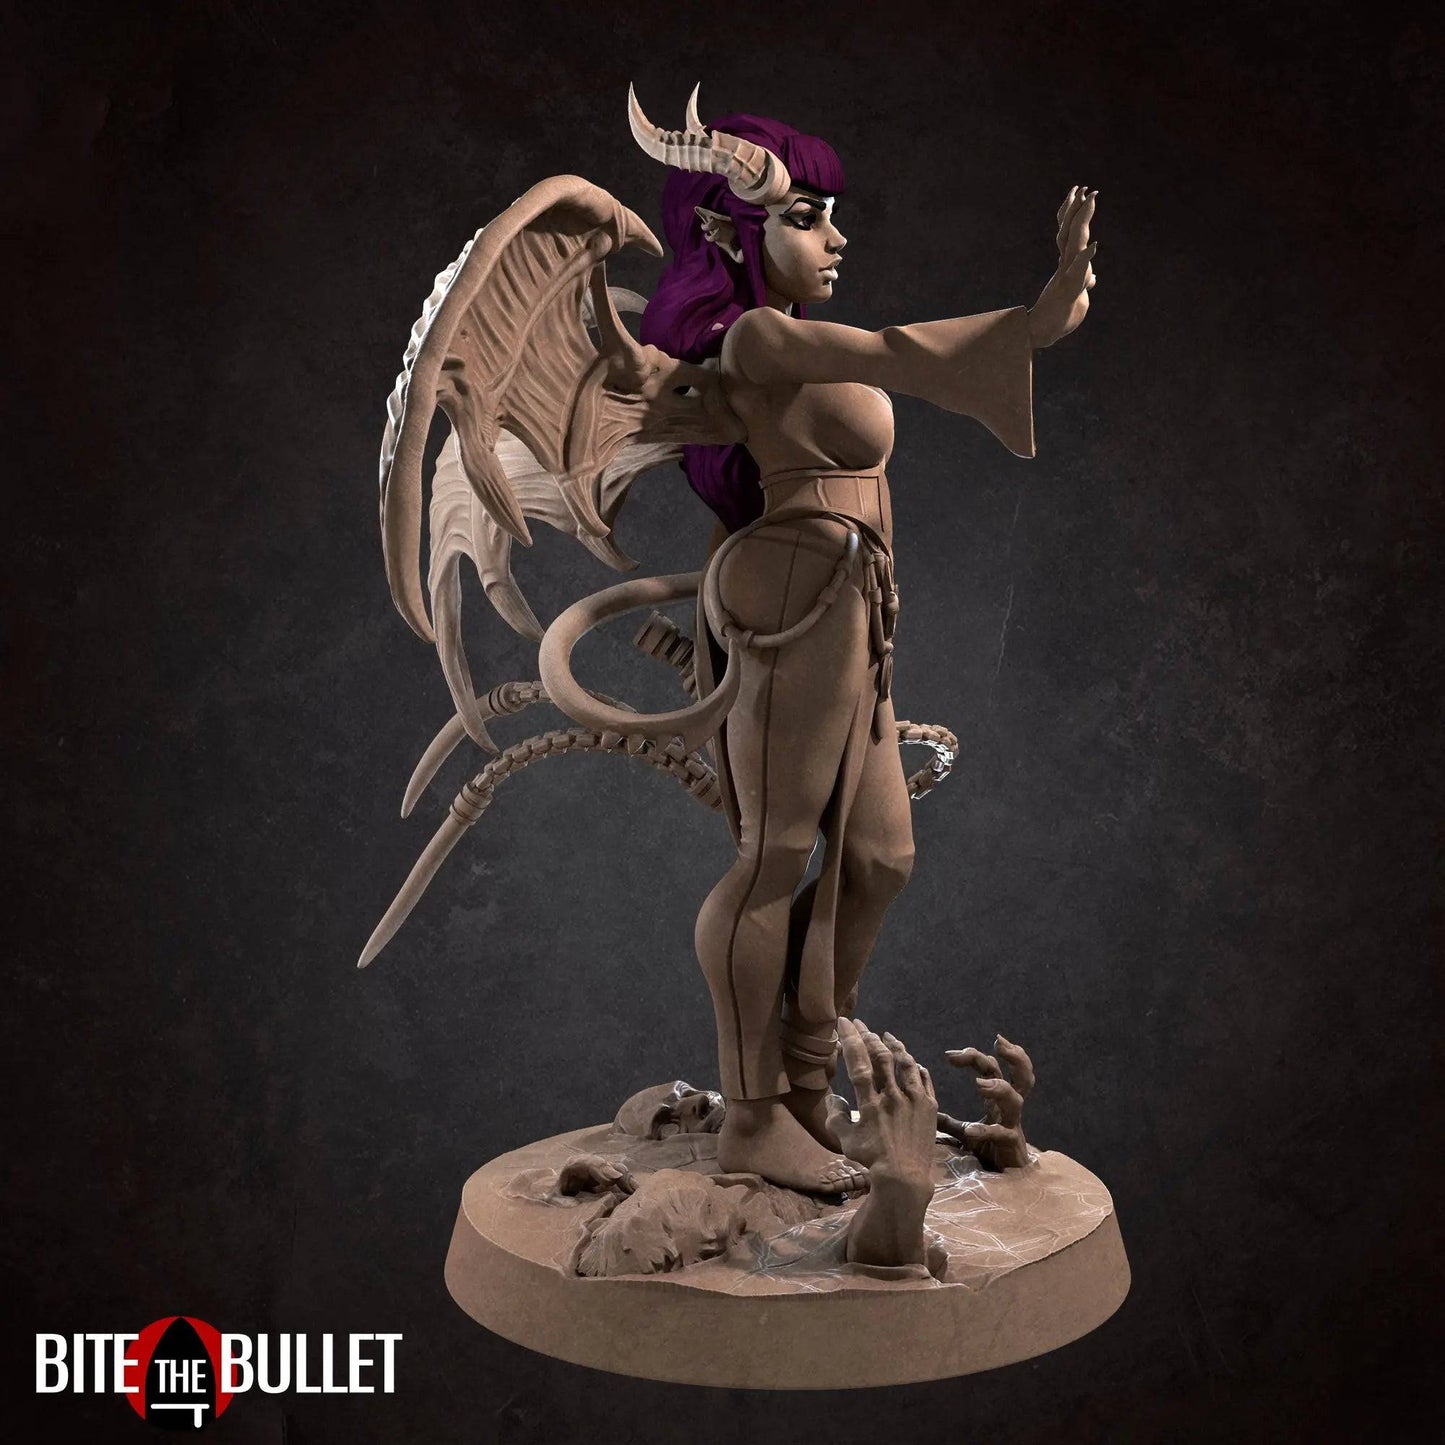 Scarlet, Pinup SFW NSFW Lovely Woman, Succubus with Whip | D&D Miniature Pinup | Bite the Bullet - Tattles Told 3D